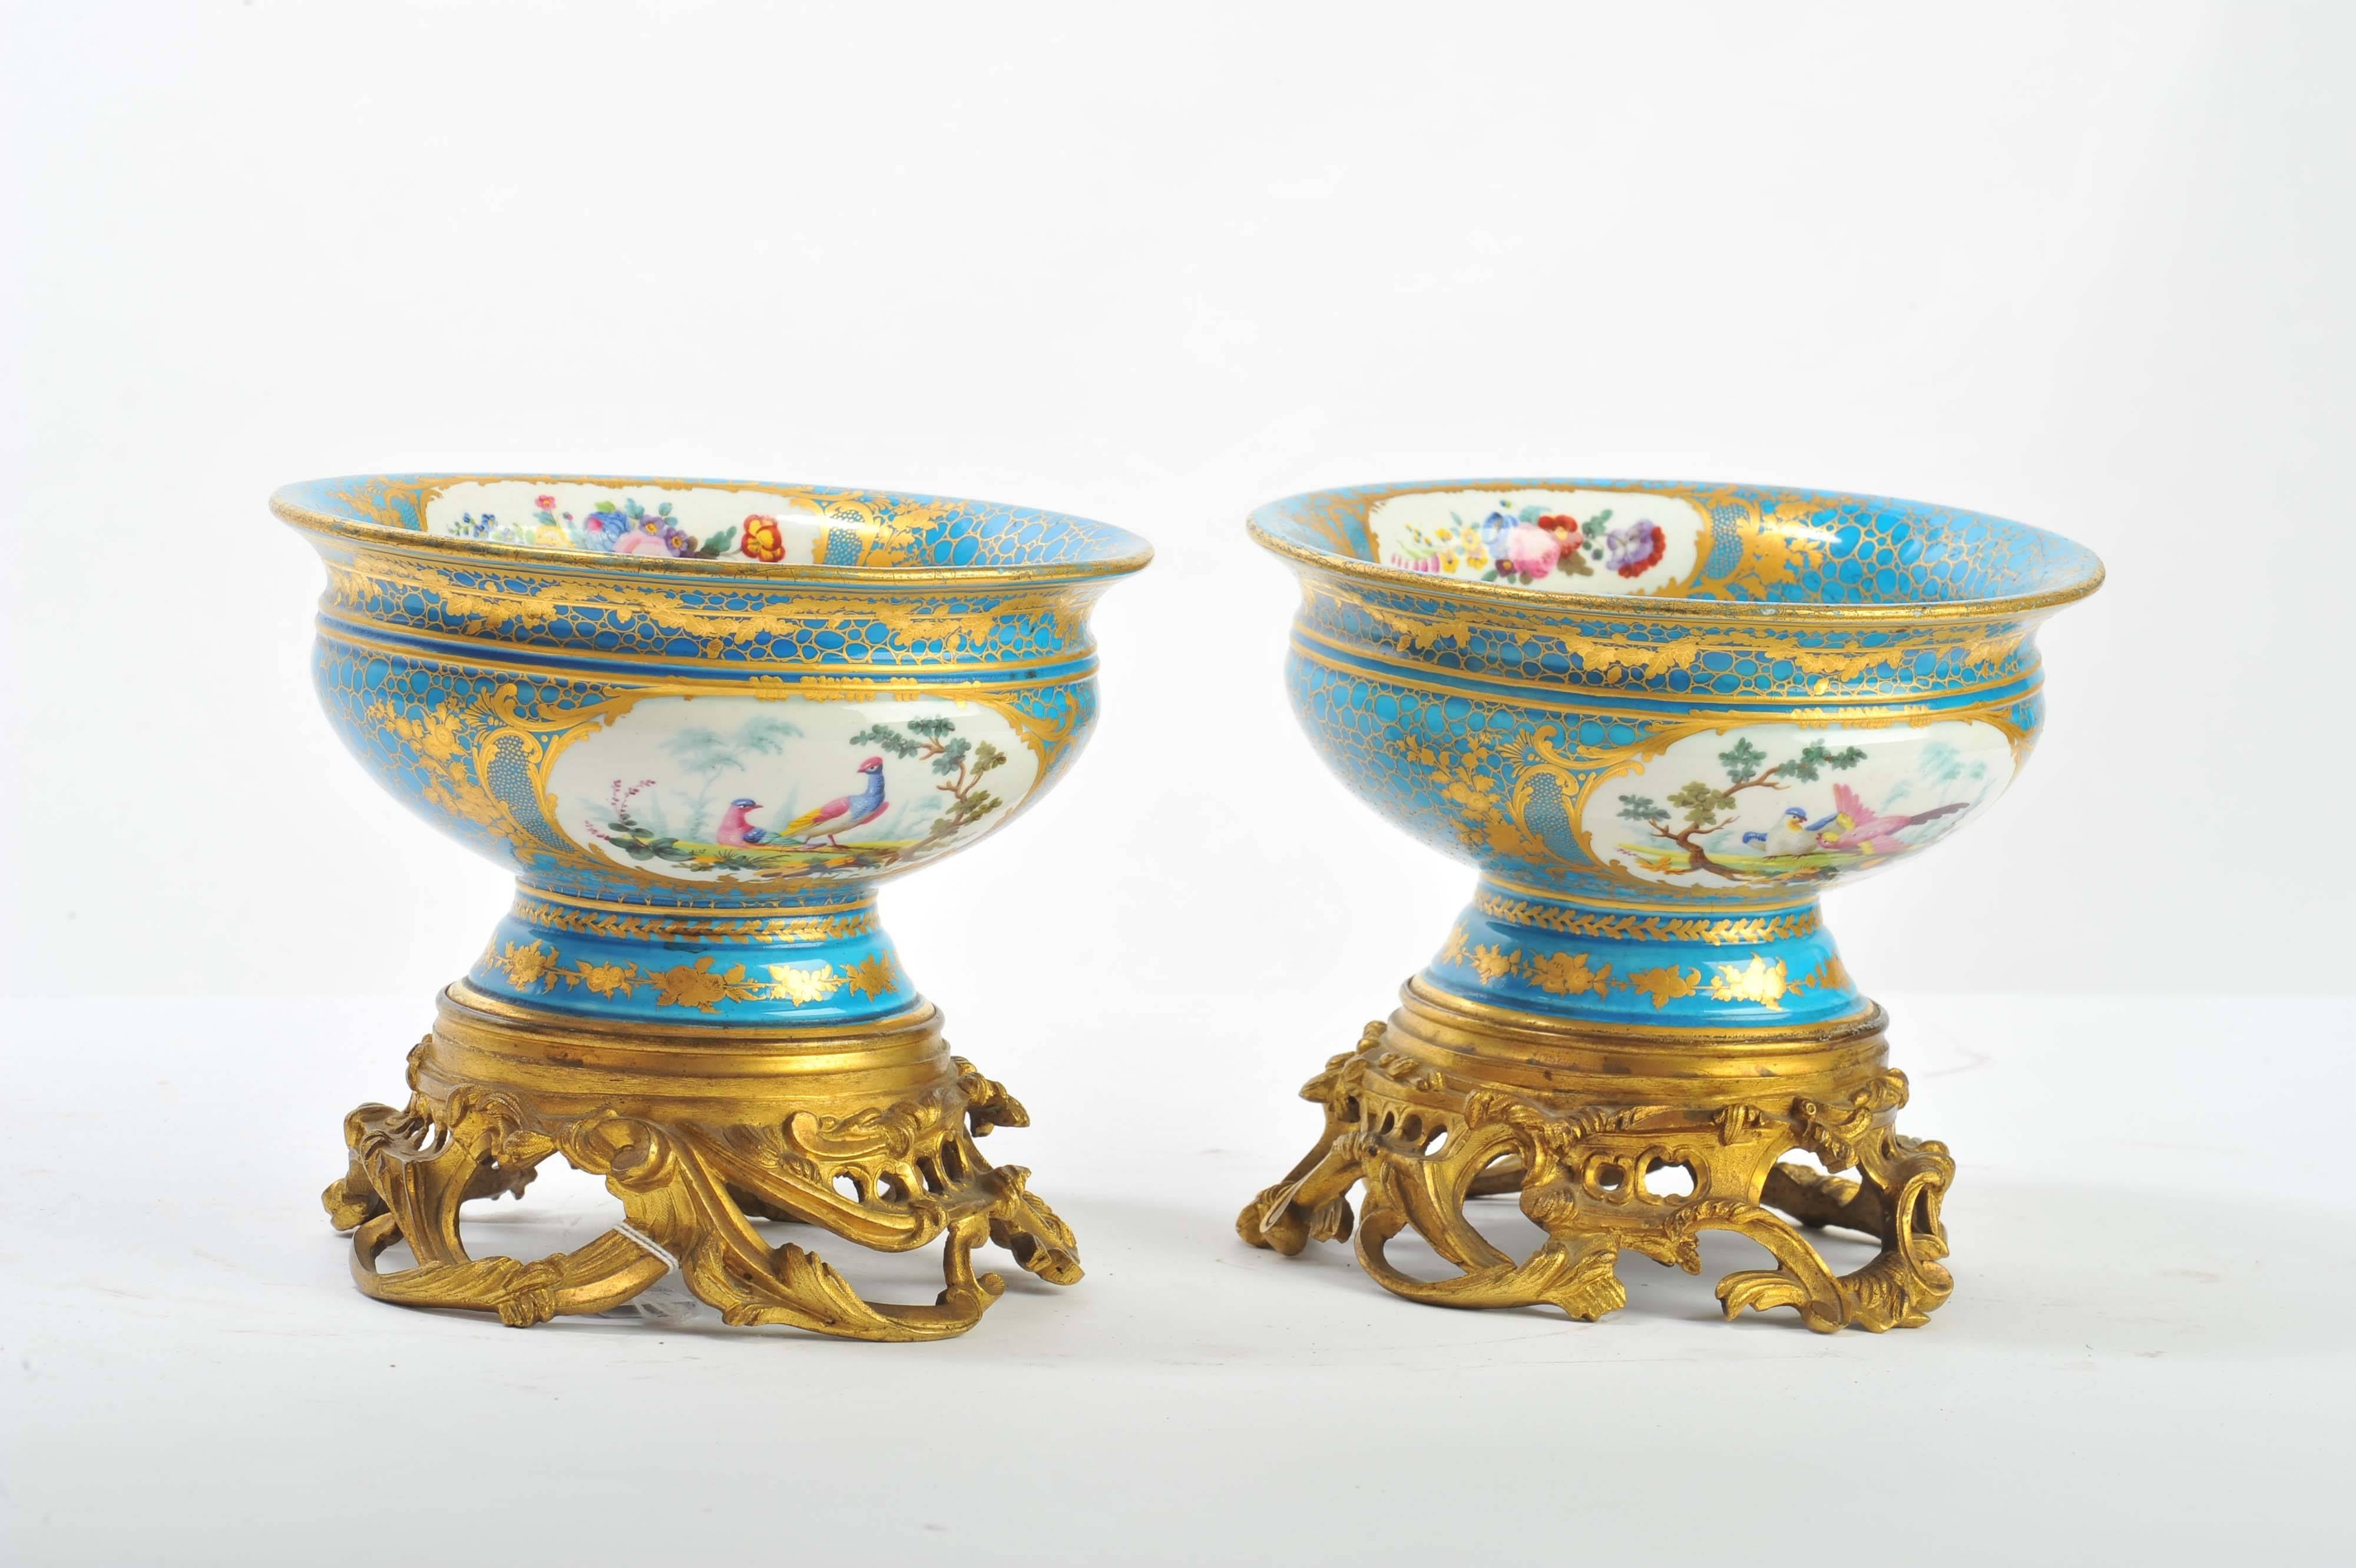 A good quality pair of 19th century gilded ormolu, sevres style porcelain jardinieres. Having panels depicting birds and flowers set in a gilded and turquoise background and raised on wonderful gilded ormolu Rococo style bases.